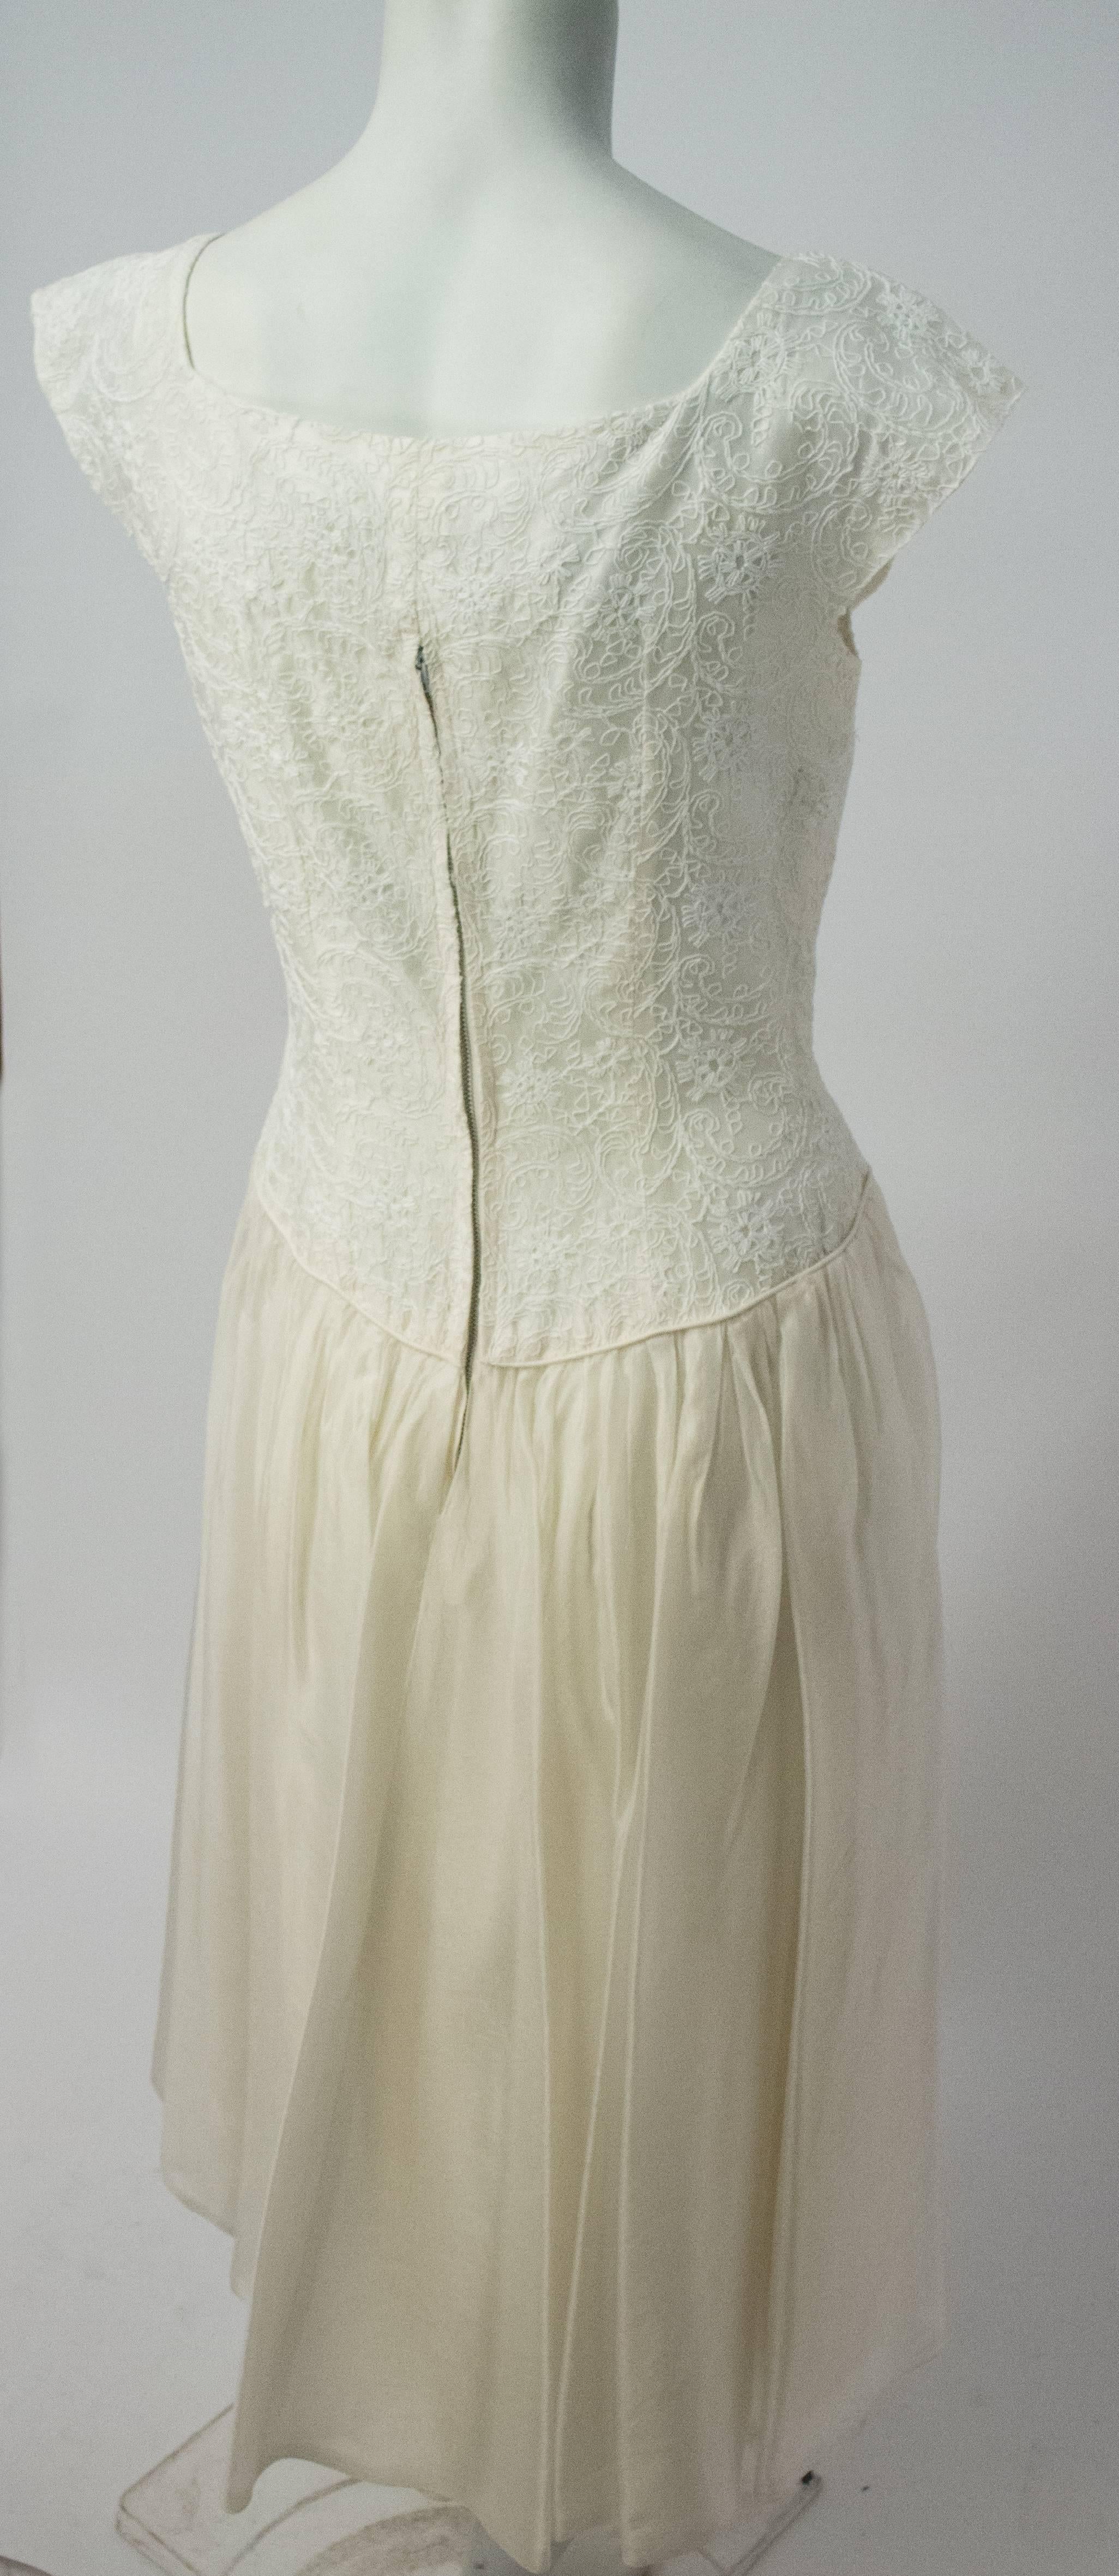 50s Emma Domb White Embroidered Organza Dress. Faux front button opening. Back metal zipper. 